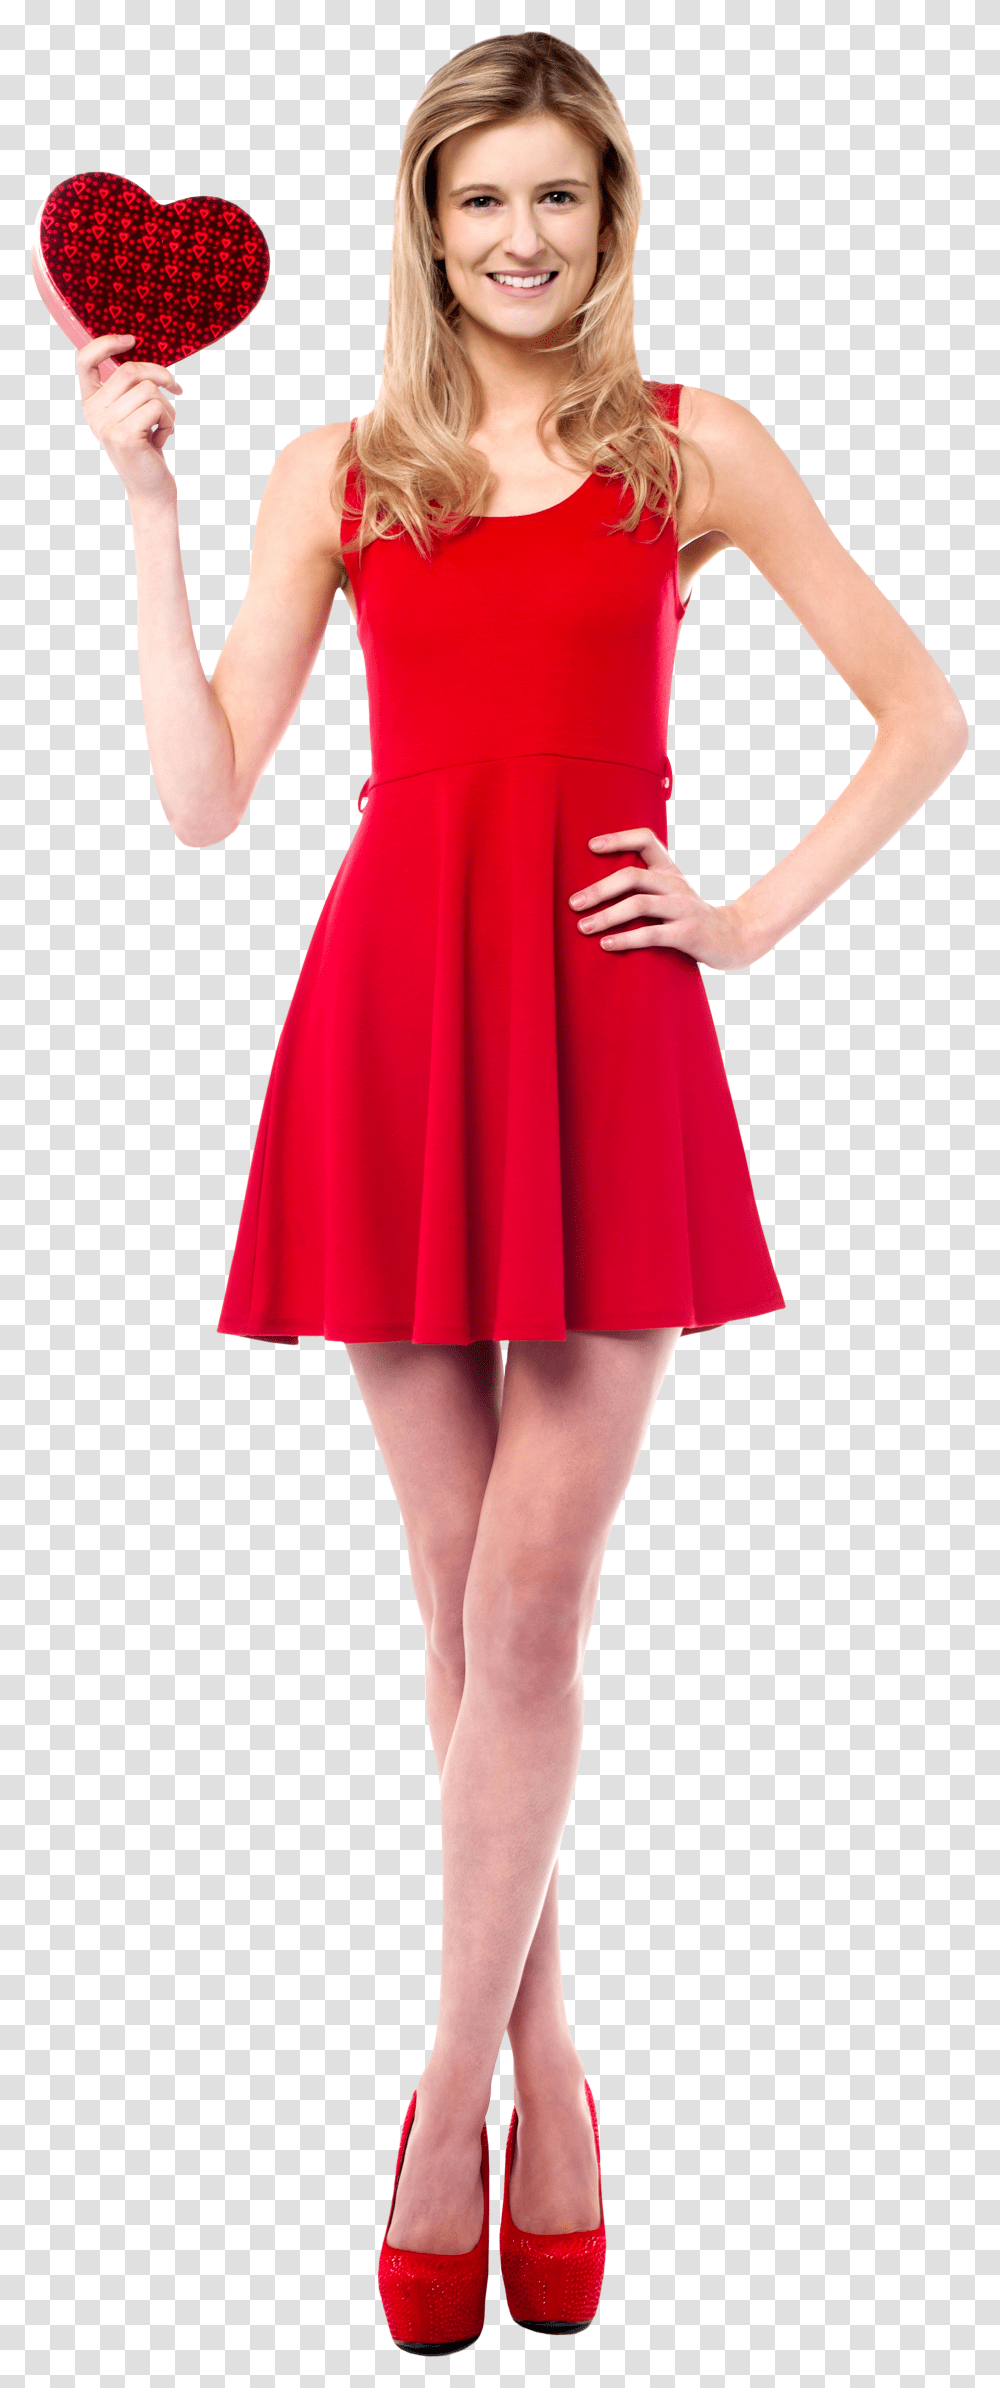 Valentines Day Girl Free Commercial Use Image Valentines Day Girl Transparent Png